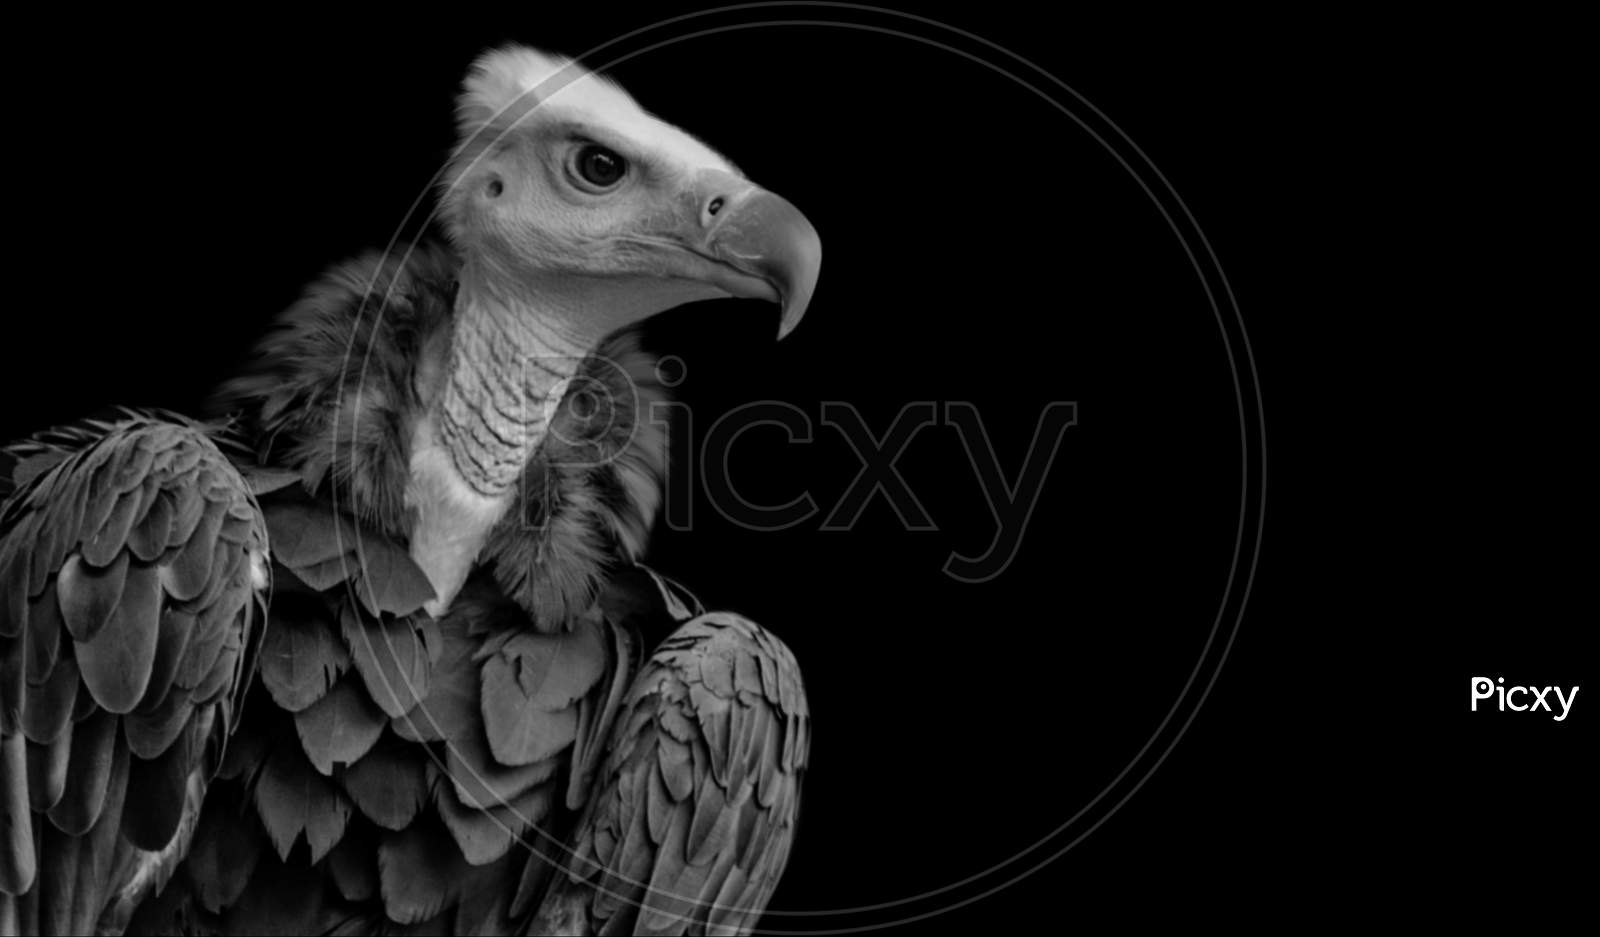 Dangerous Black And White Vulture Bird Sitting In The Black Background